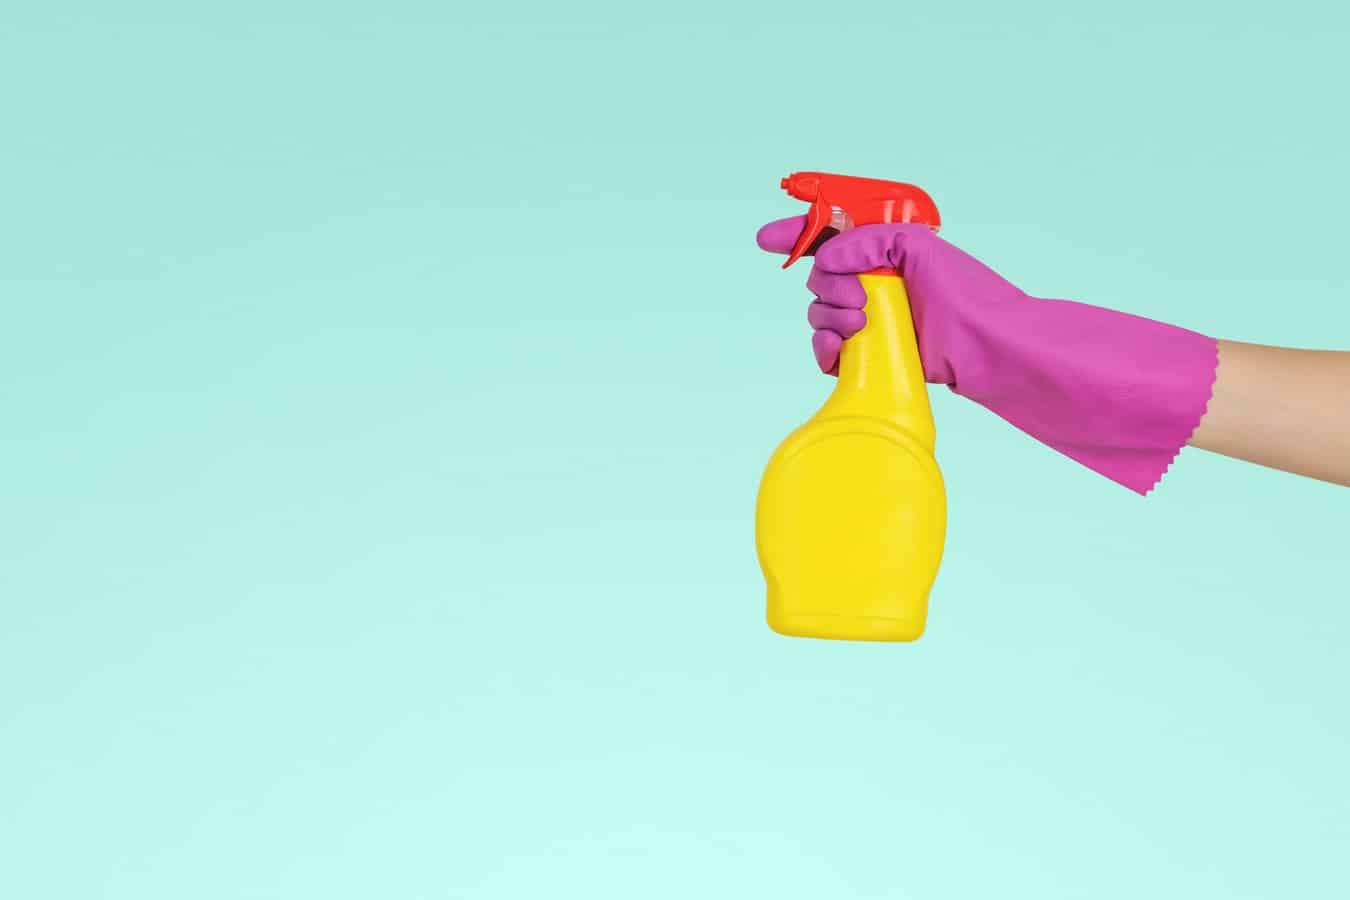 Rubber Gloved hand with spray bottle